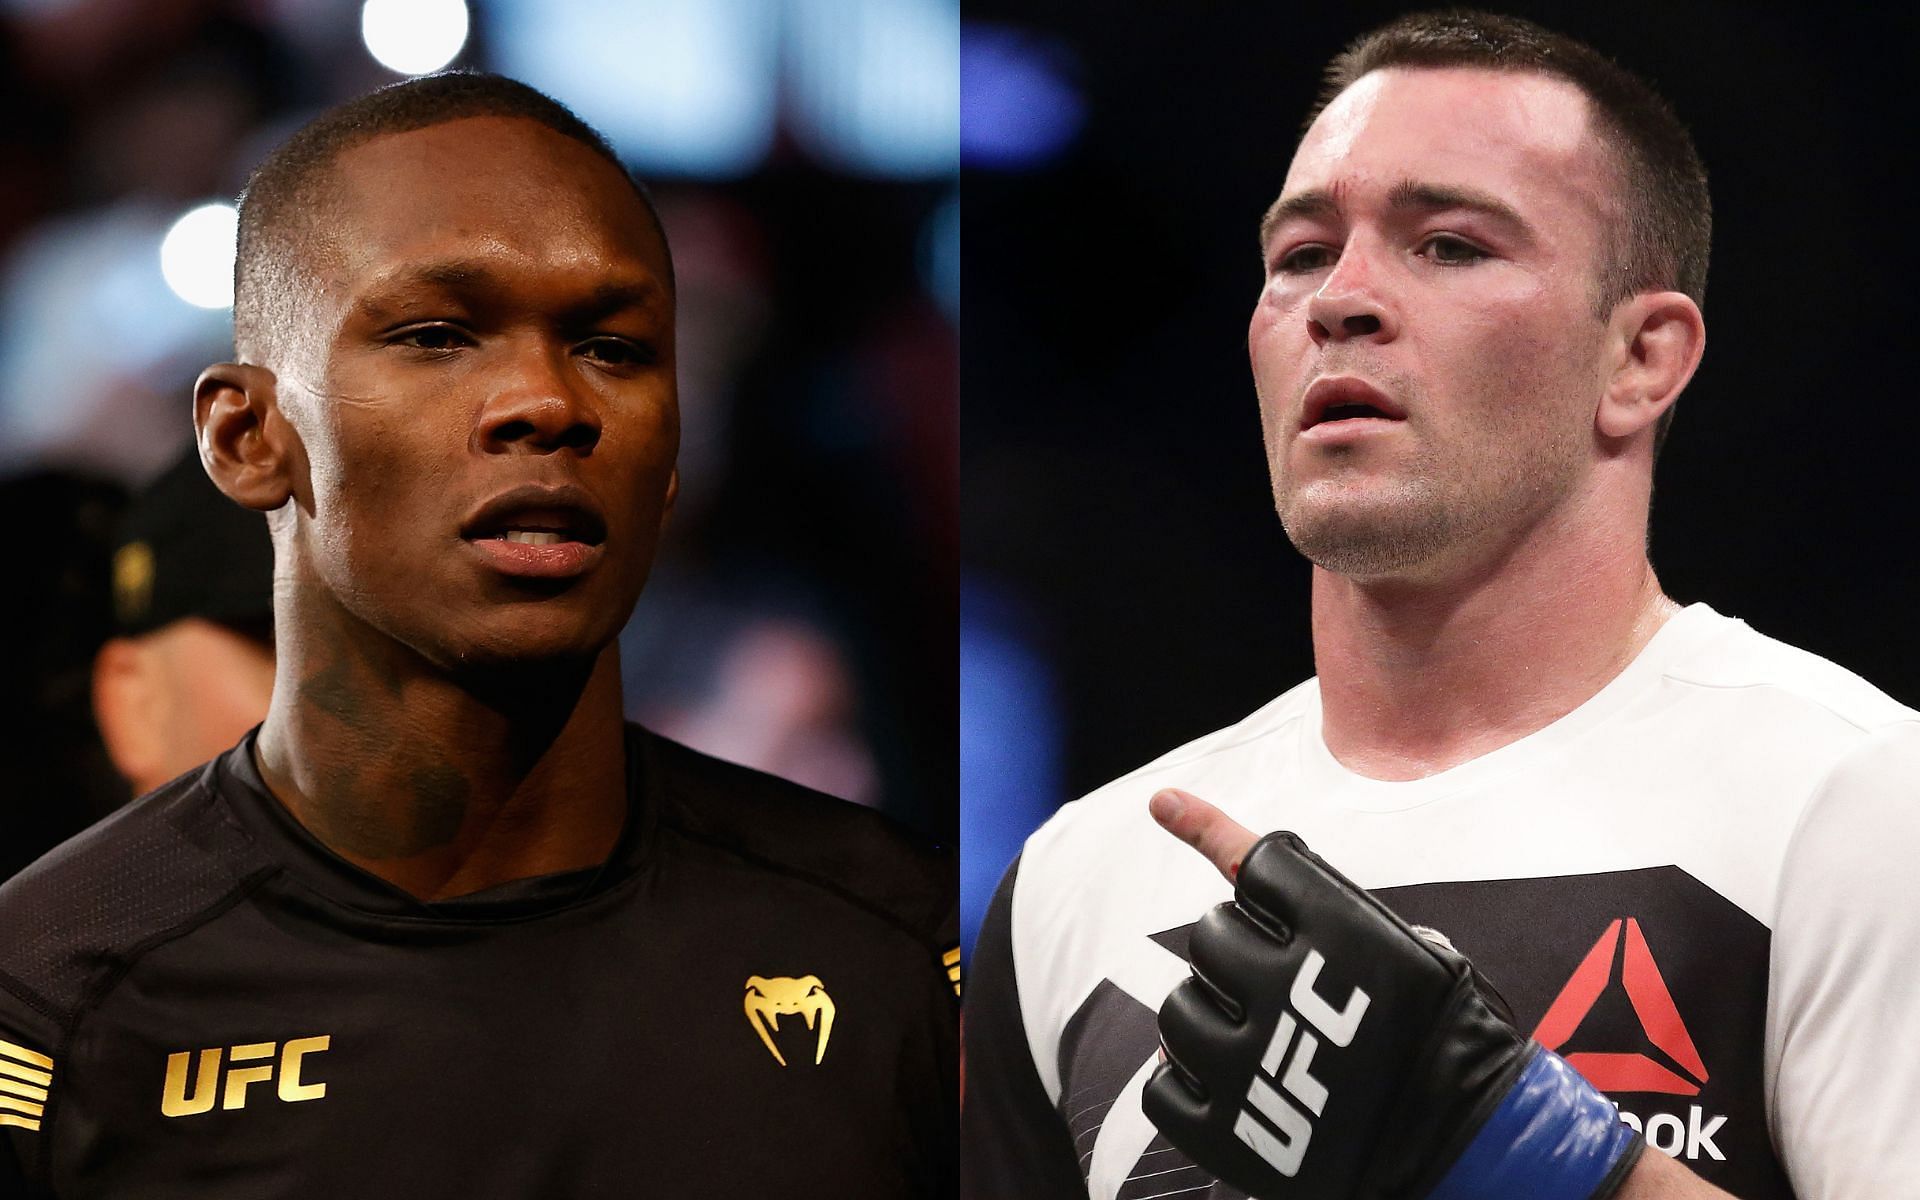 UFC superstars Israel Adesanya (left) and Colby Covington (right)